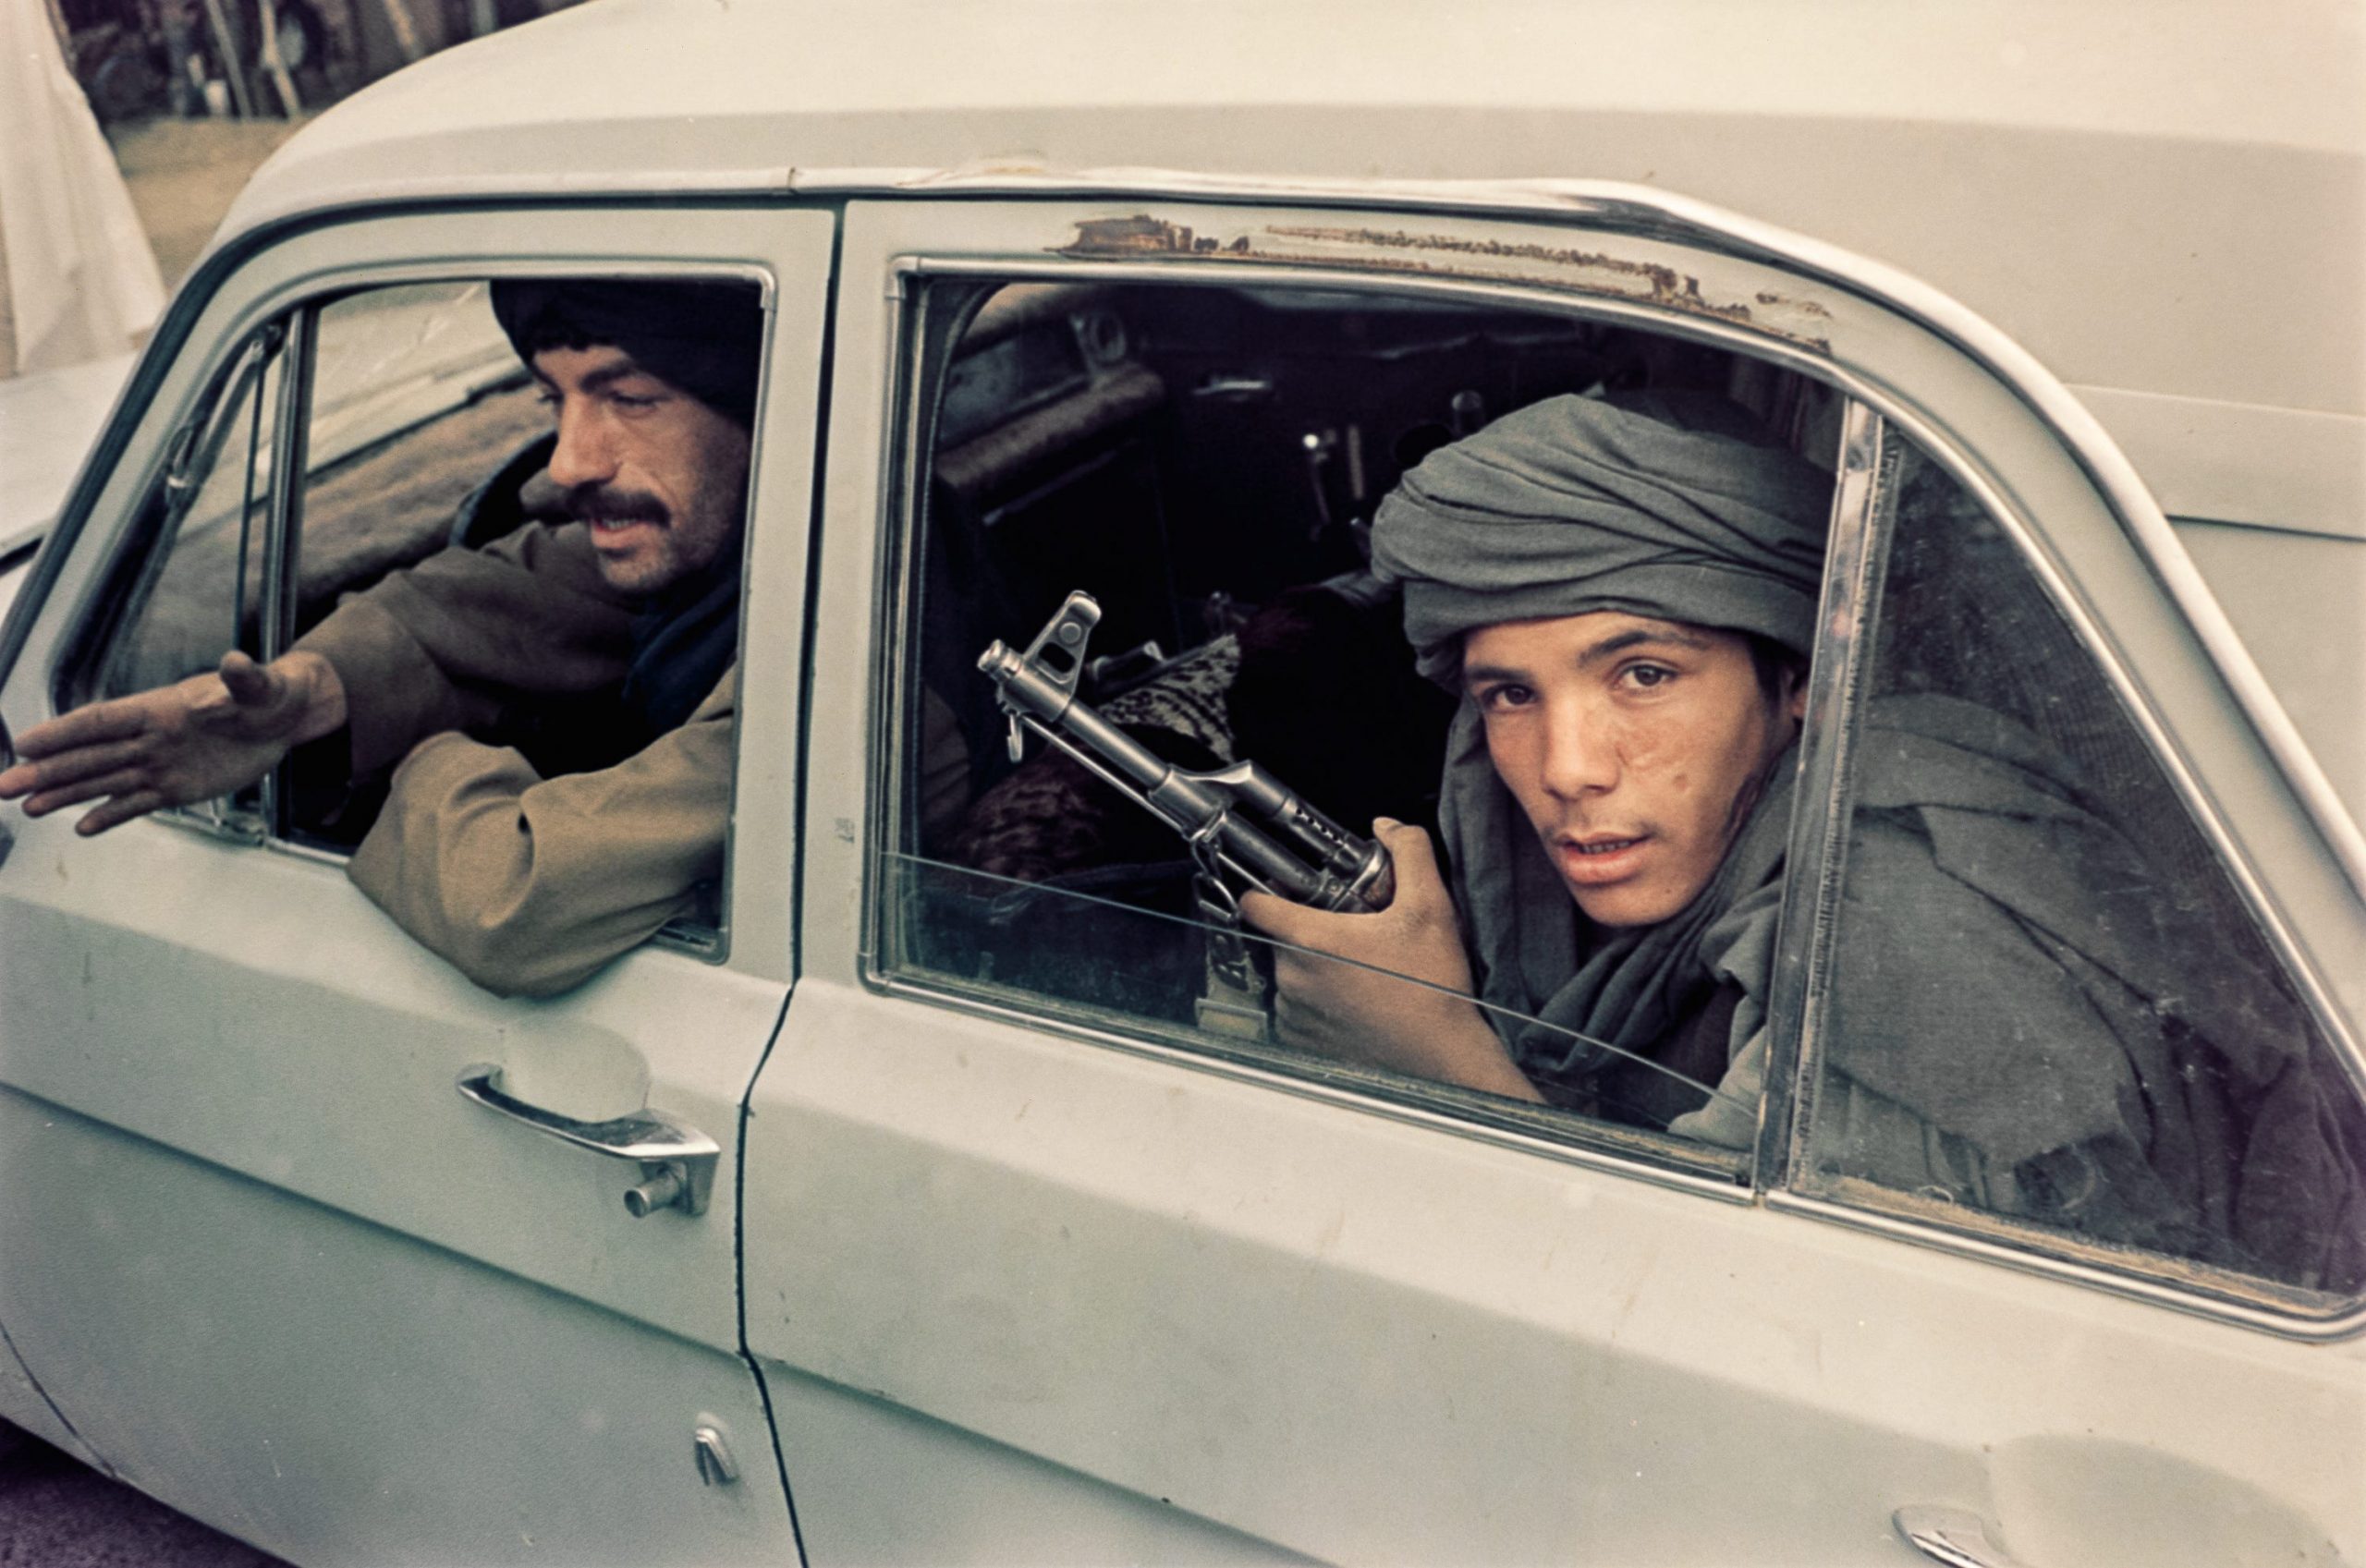 Two men are seen in a car, and the one in back looks out the window as he clasps a gun.